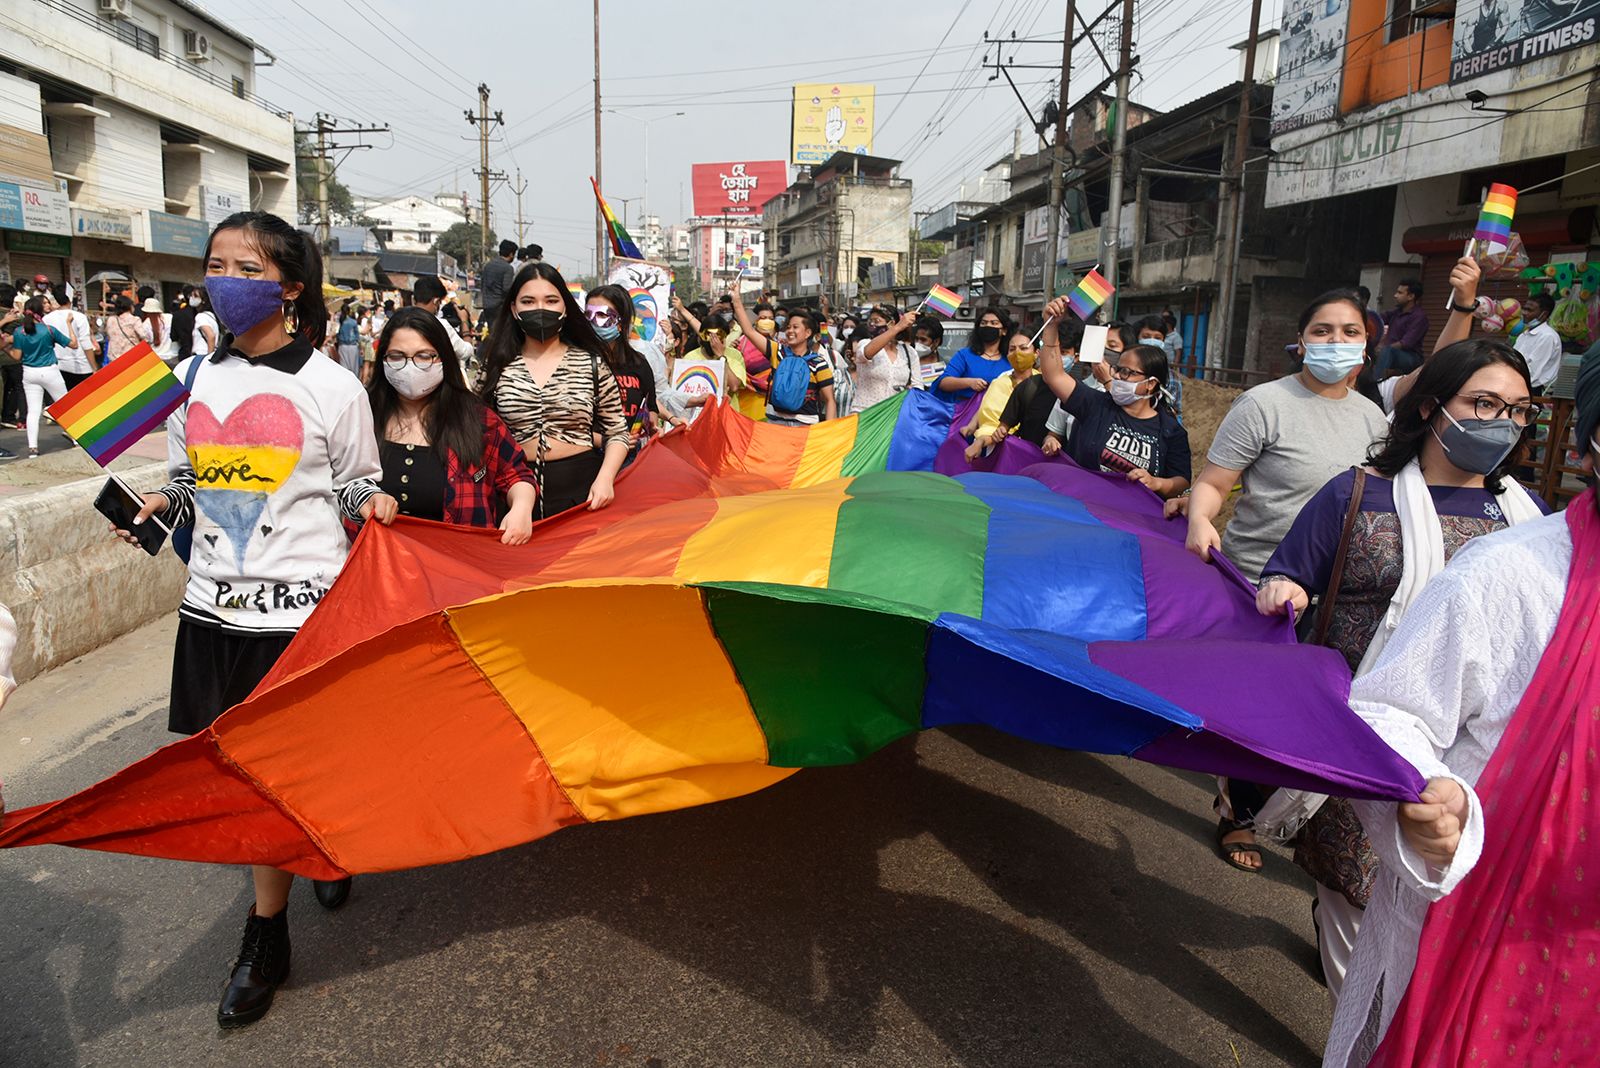 Indian court raises LGBT hopes of finding home in traditional faiths